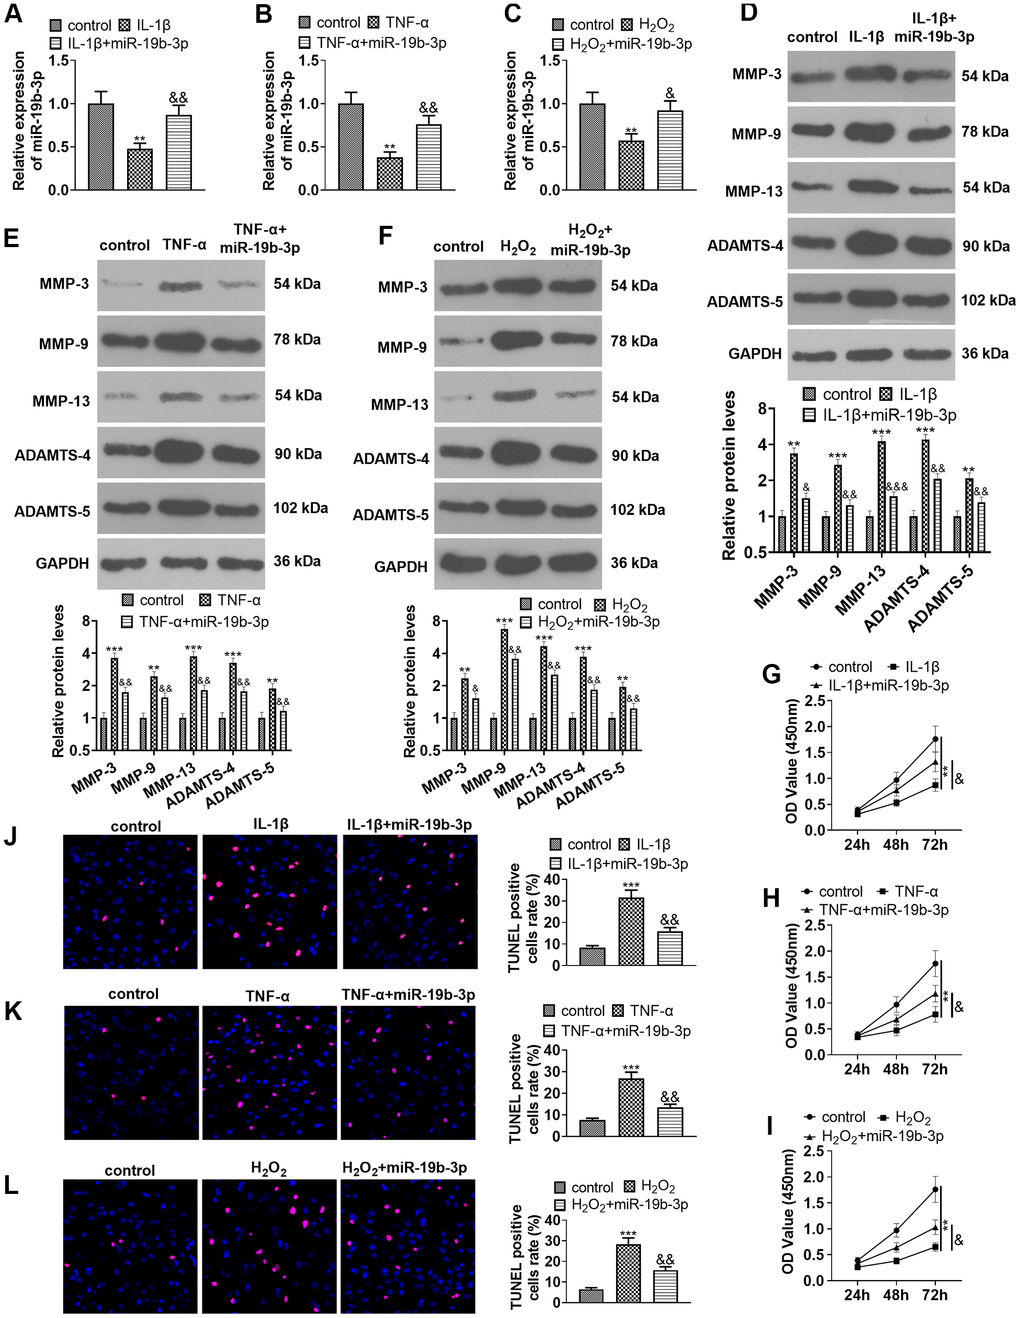 Overexpressing miR-19b-3p attenuated IL-1β/TNF-α/hydrogen peroxide-mediated HNPC apoptosis. In the in-vitro IVDD model, HNPCs were transfected with miR-19b-3p mimics. (A–C) The miR-19b-3p expression was determined by qRT-PCR. (D–F) The levels of MMP-3, MMP-9, MMP-13, ADAMTS-4 and ADAMTS-5 were compared by WB. (G–I) CCK-8 experiment was implemented to test cell proliferation. (J–L) Cell apoptosis was monitored by TUNEL staining ** P P P P P 